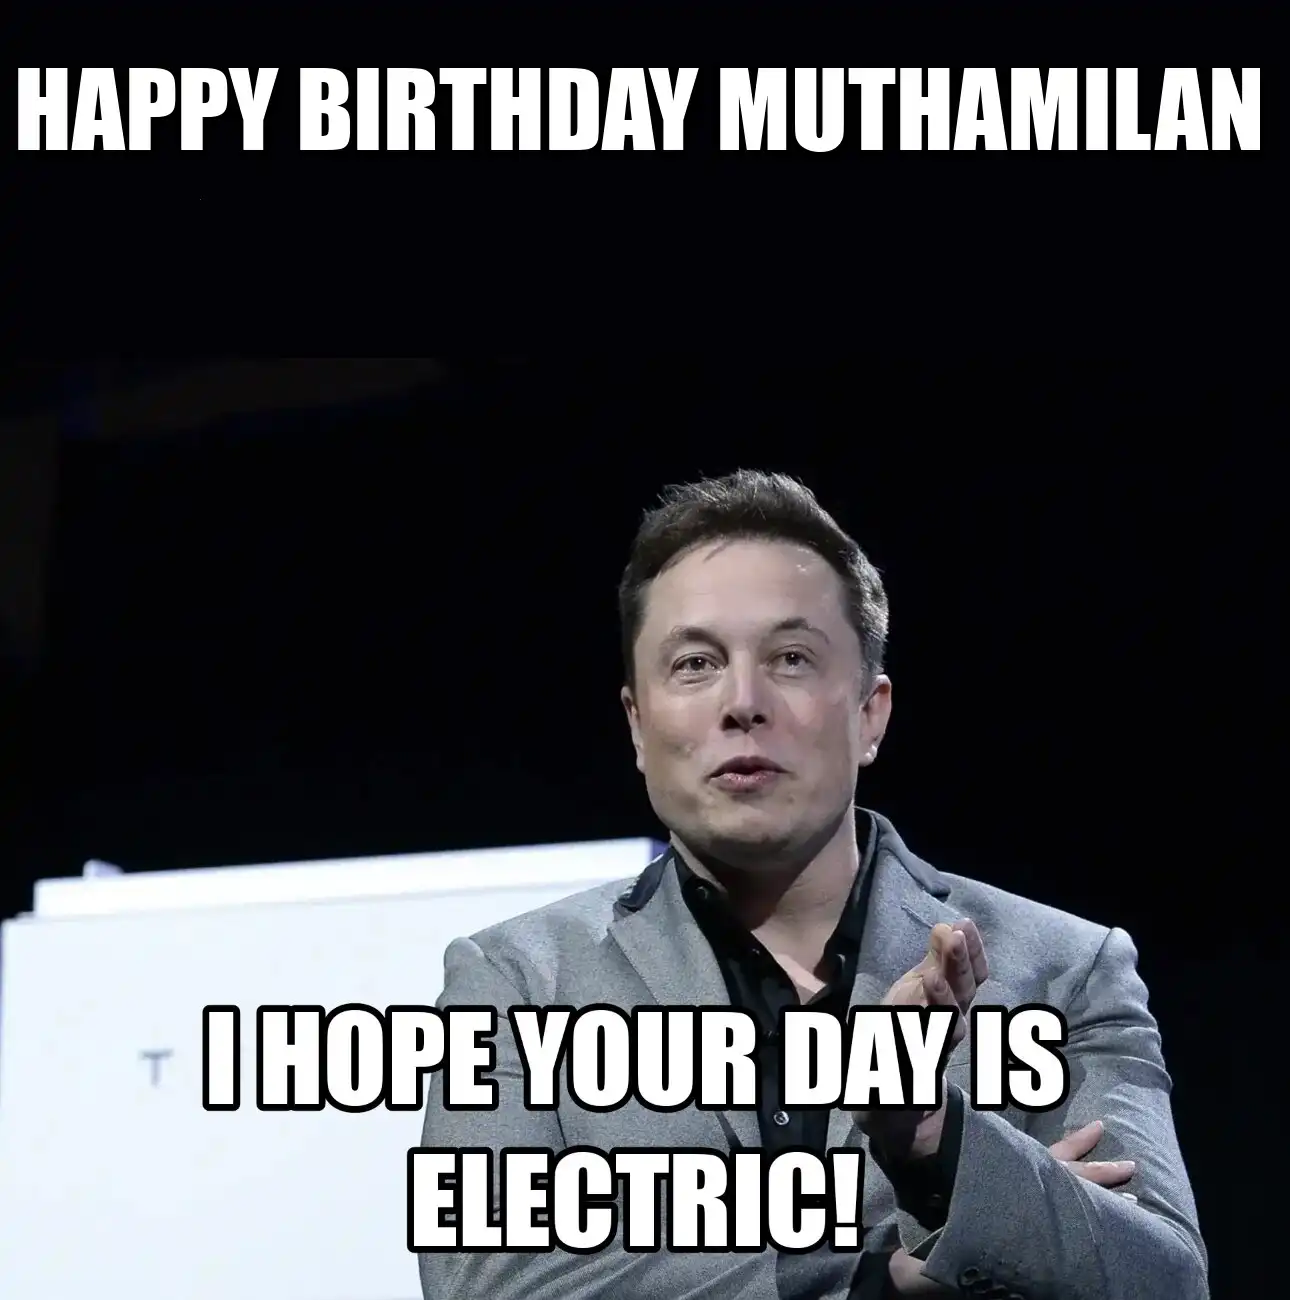 Happy Birthday Muthamilan I Hope Your Day Is Electric Meme